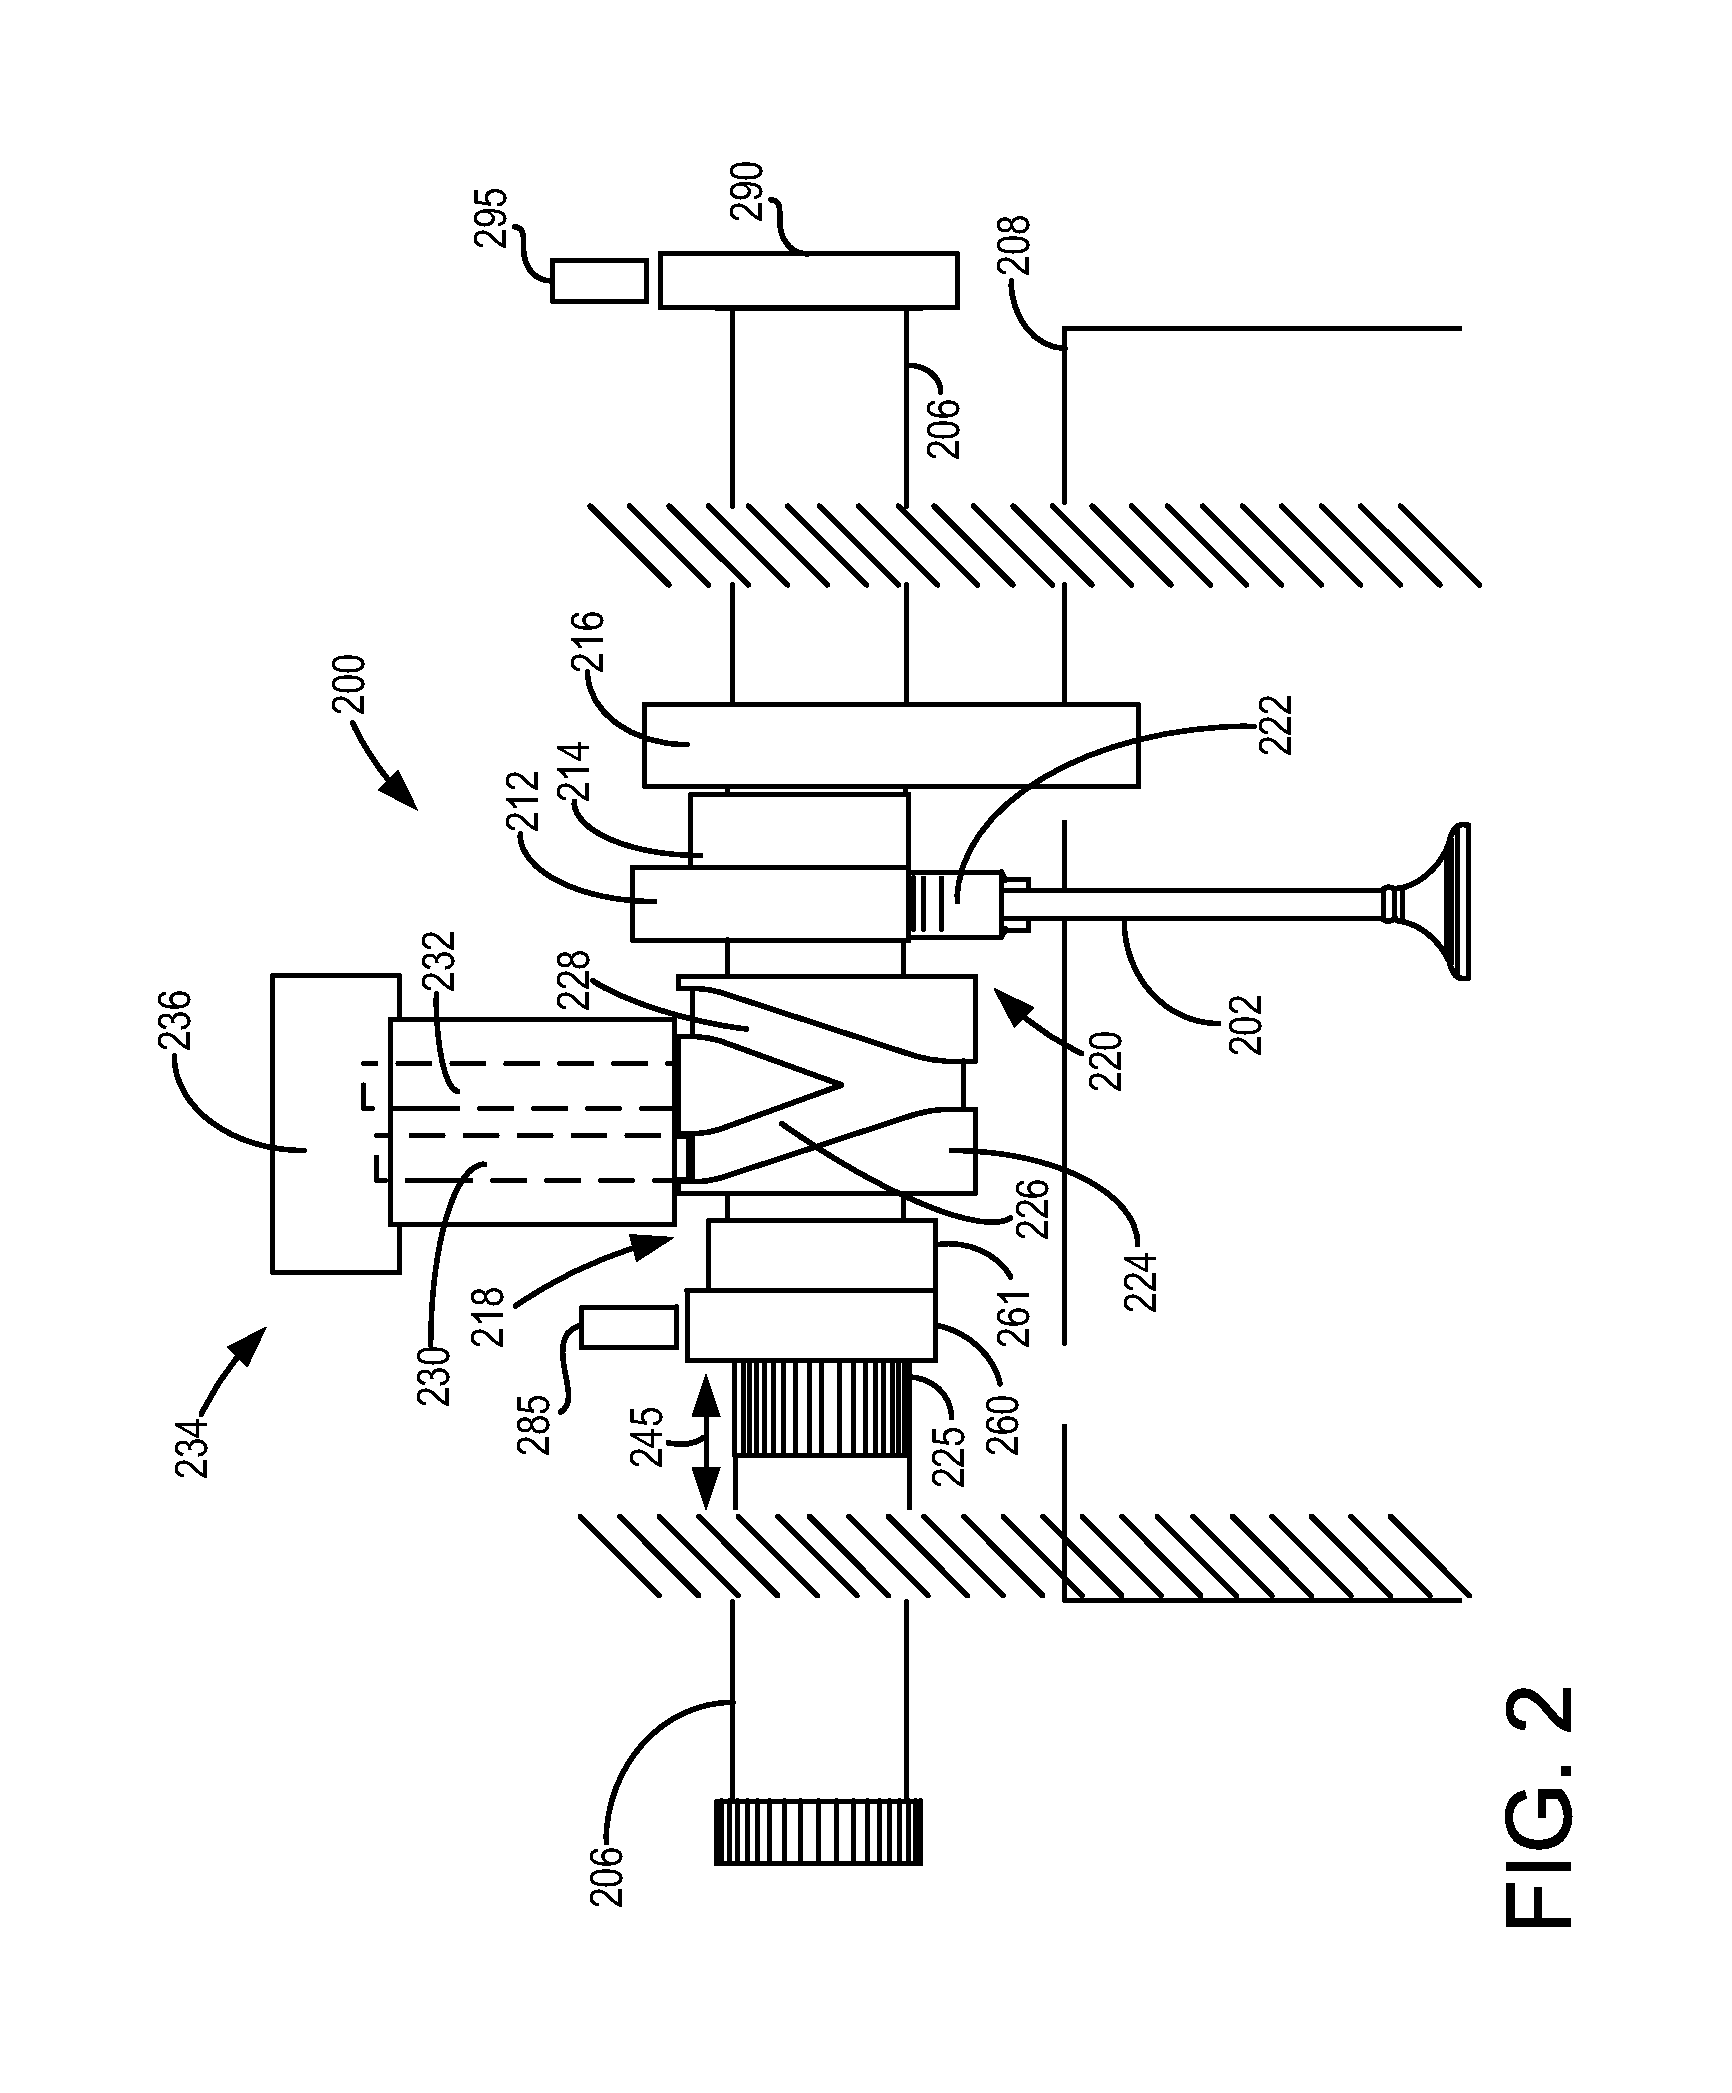 Position detection for lobe switching camshaft system